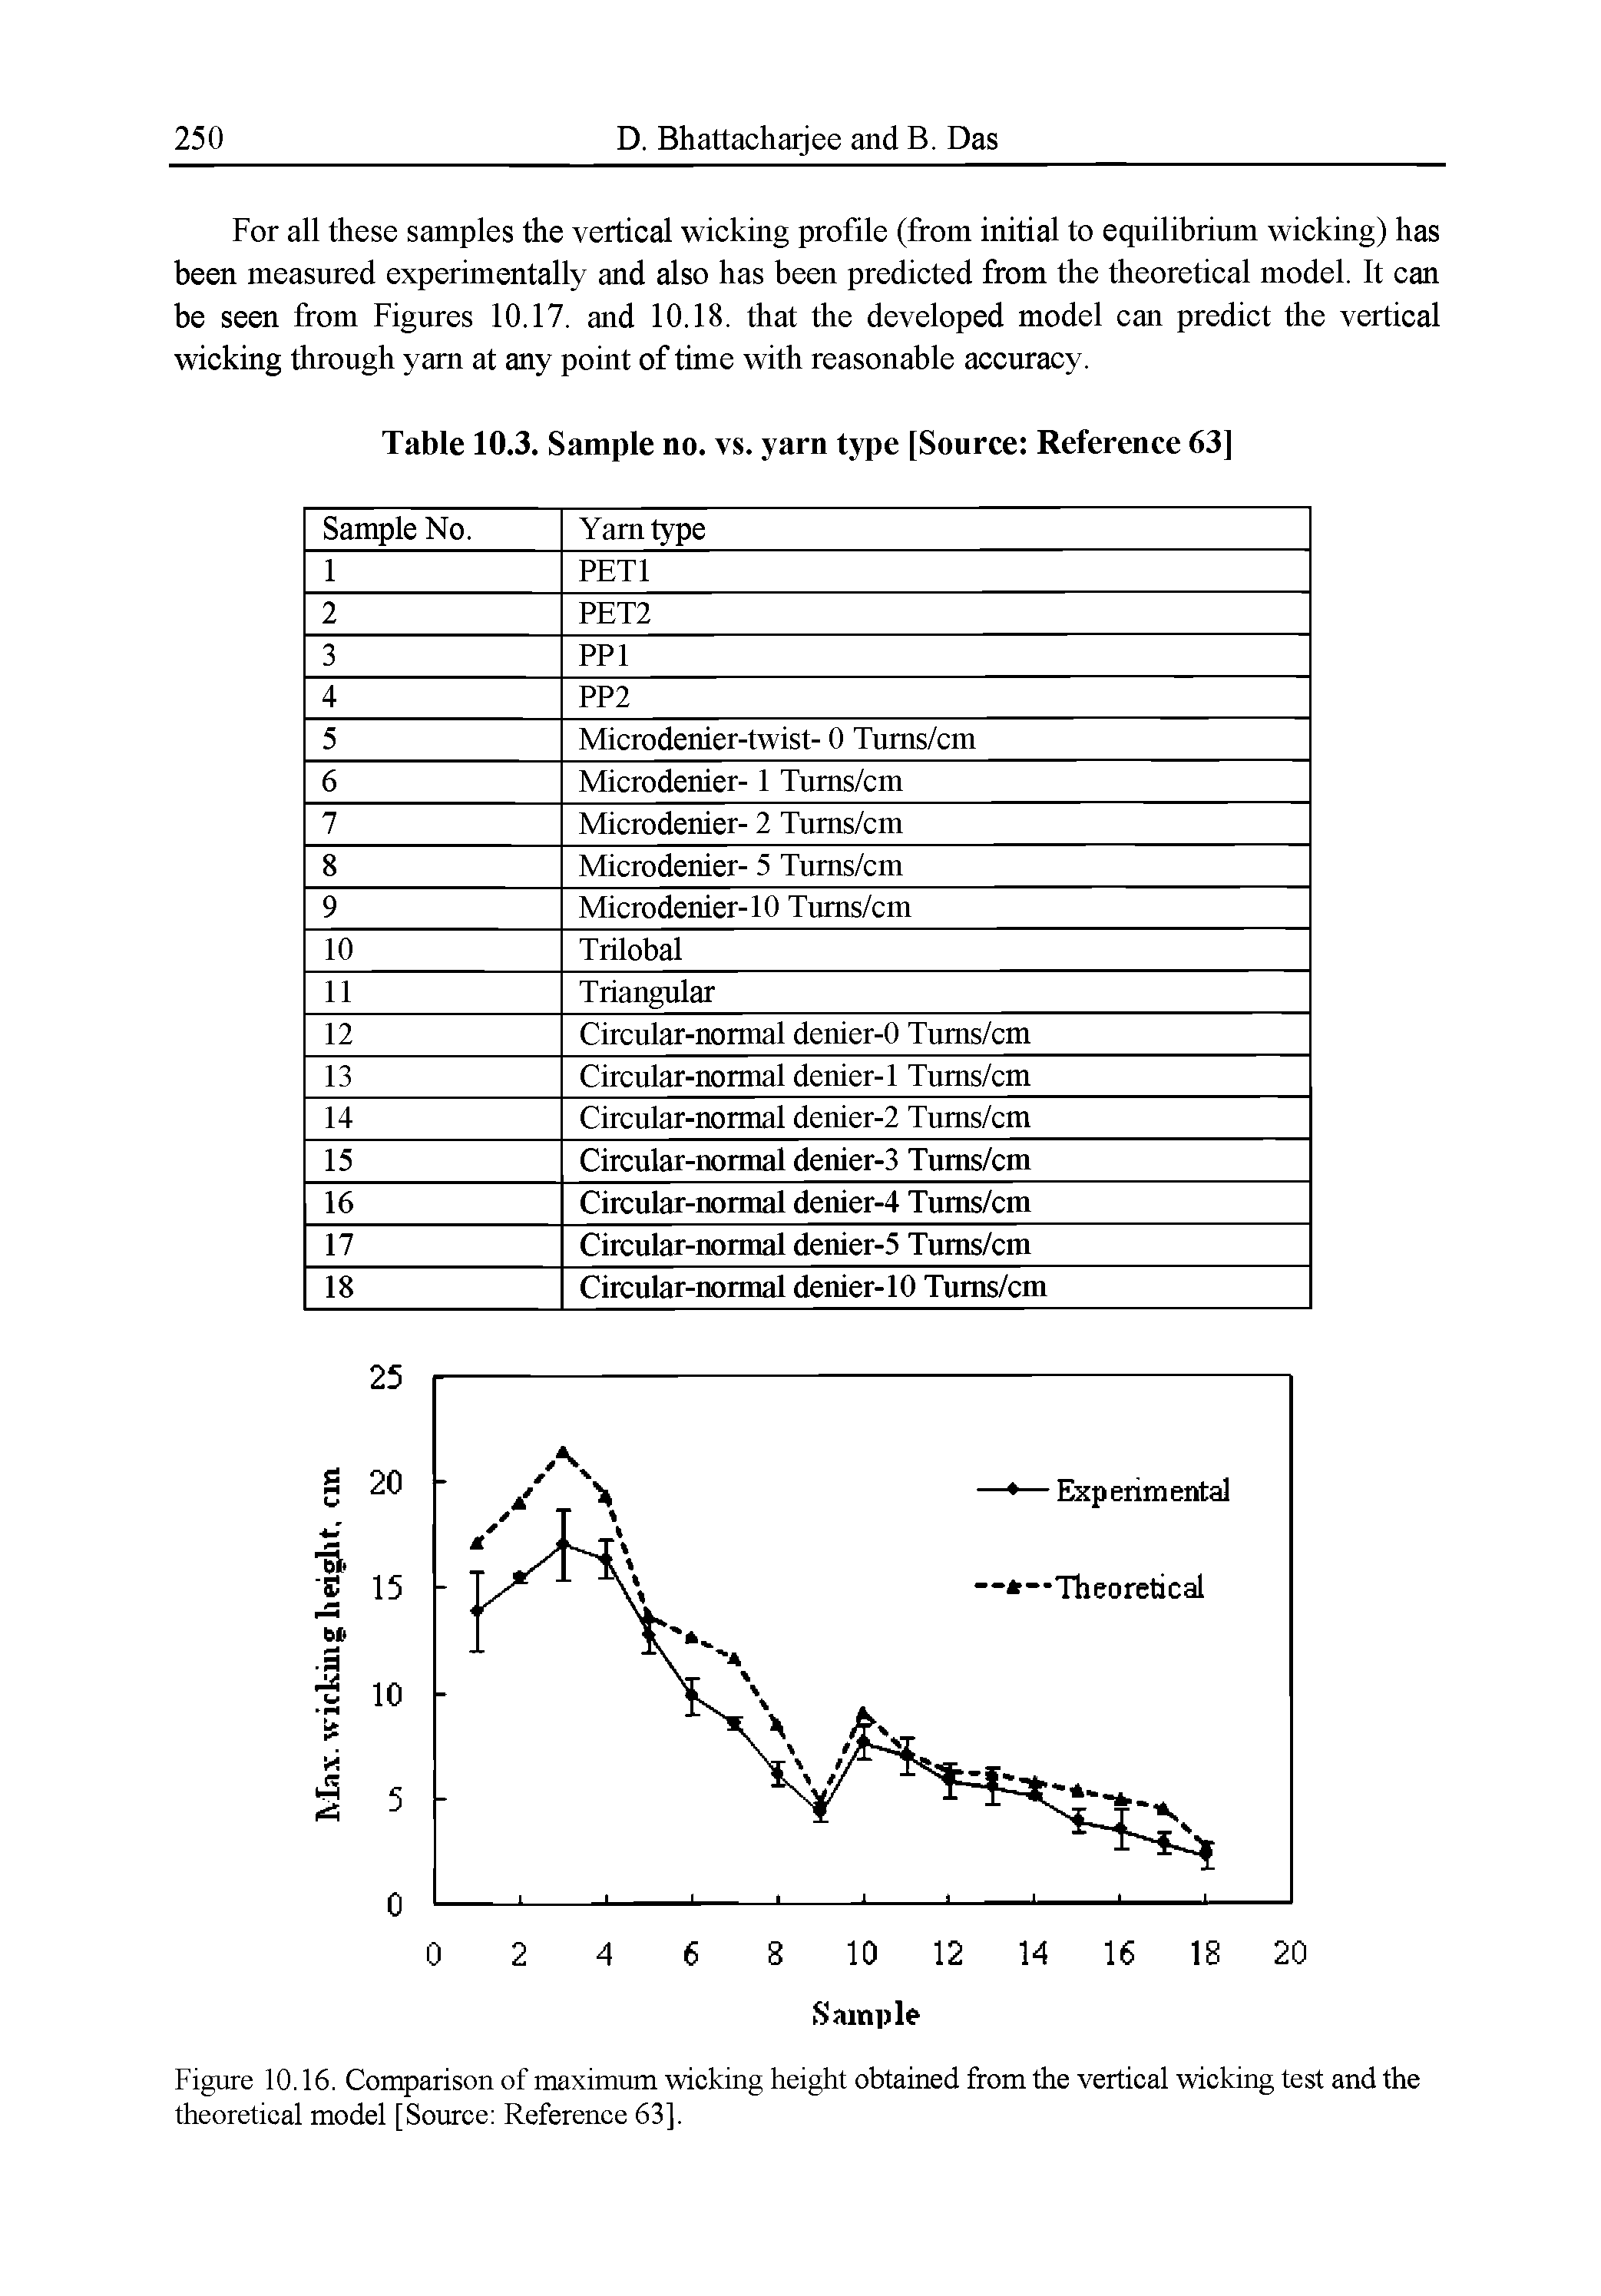 Figure 10.16. Comparison of maximum wicking height obtained from the vertical wicking test and the theoretical model [Source Reference 63].